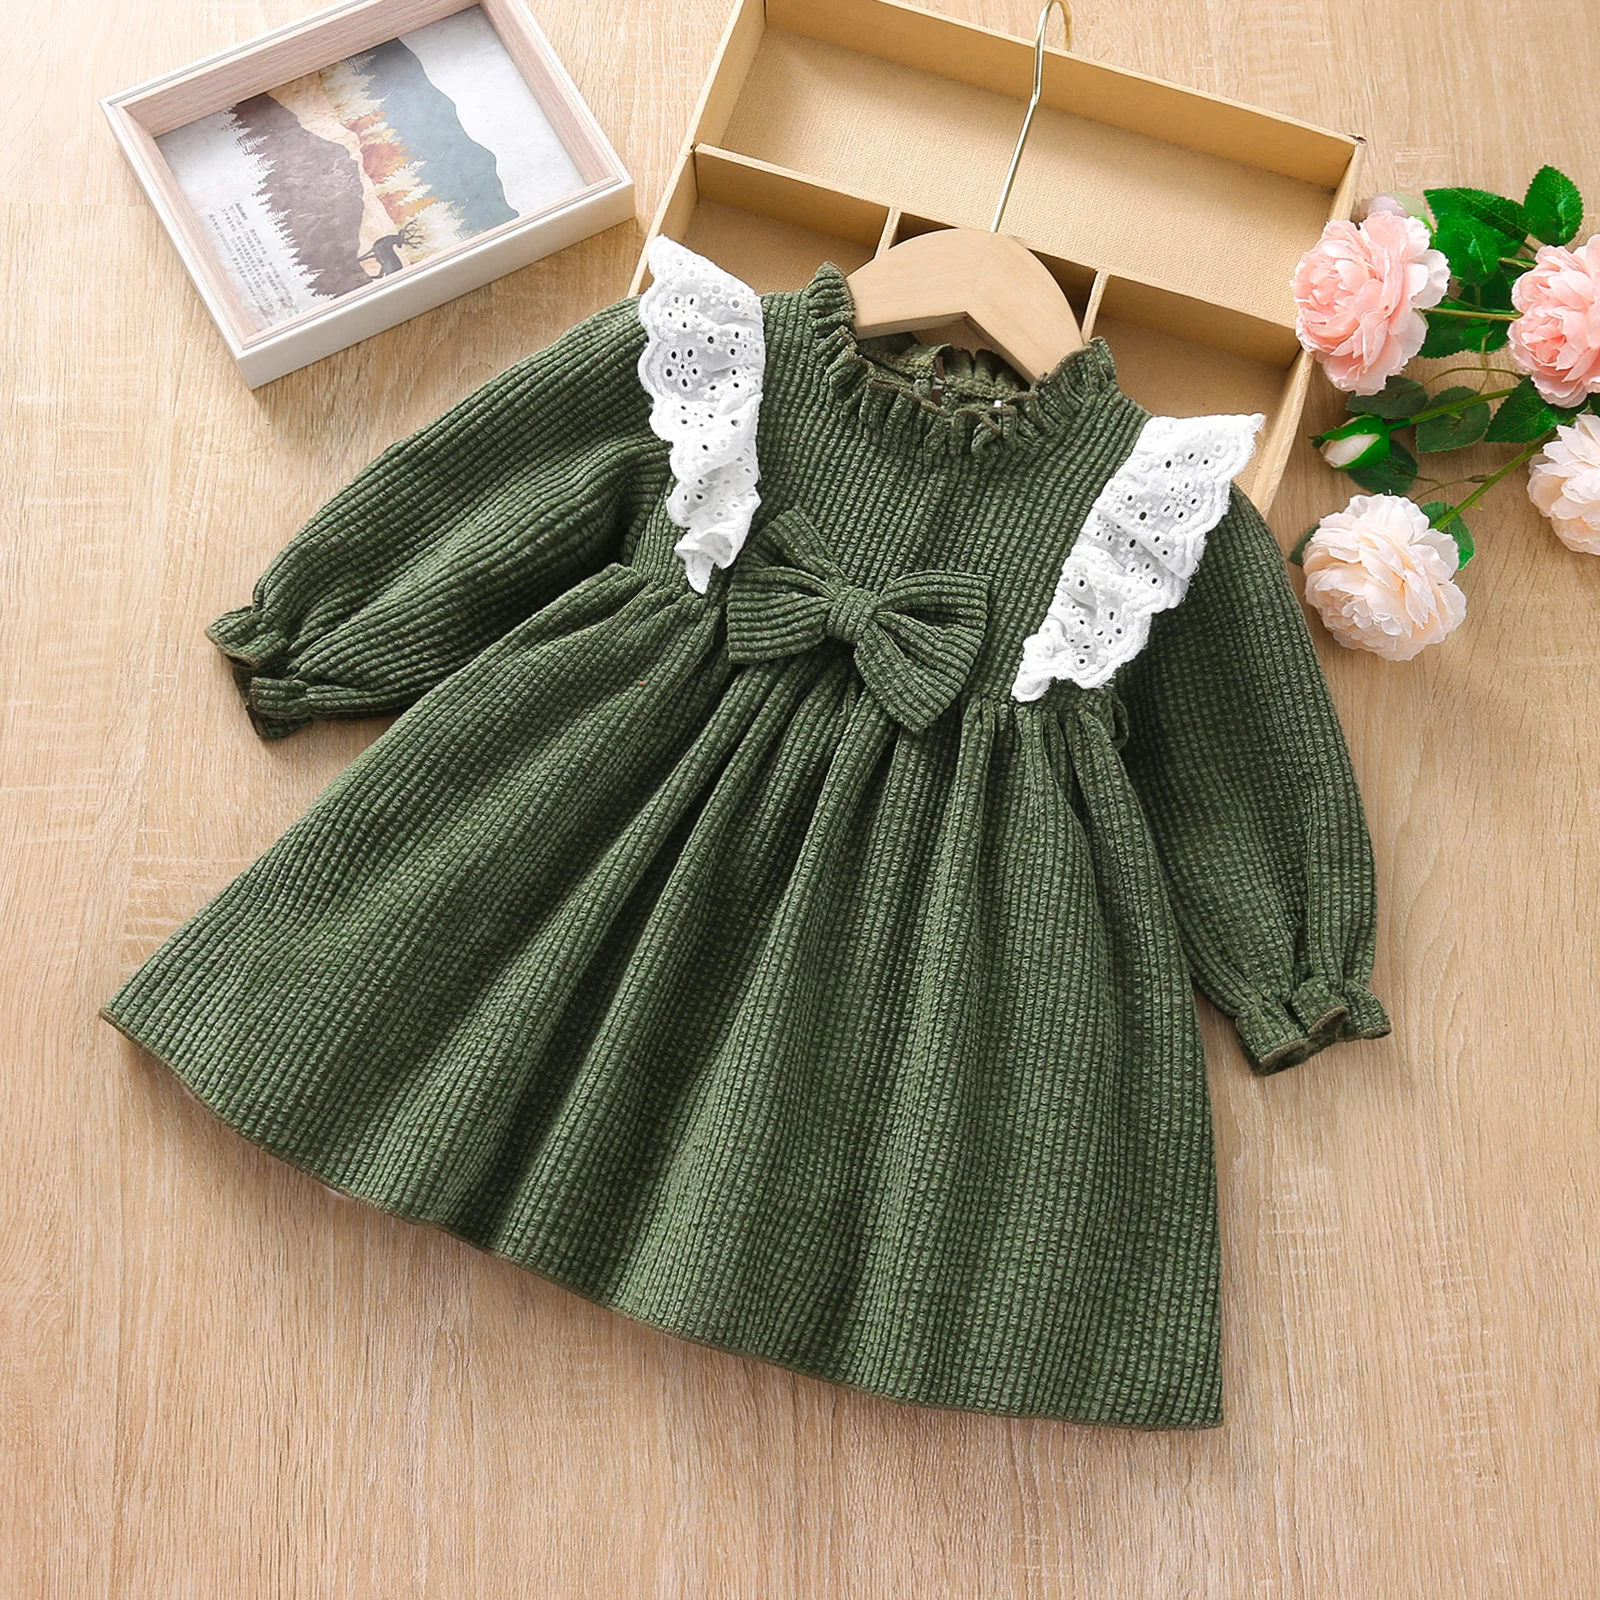 3 months-3 years Old Angel Baby Girl Autumn Winter Dress bow Lantern Long Sleeve Ruffle Elegant Toddler Kids Small Stand Collar